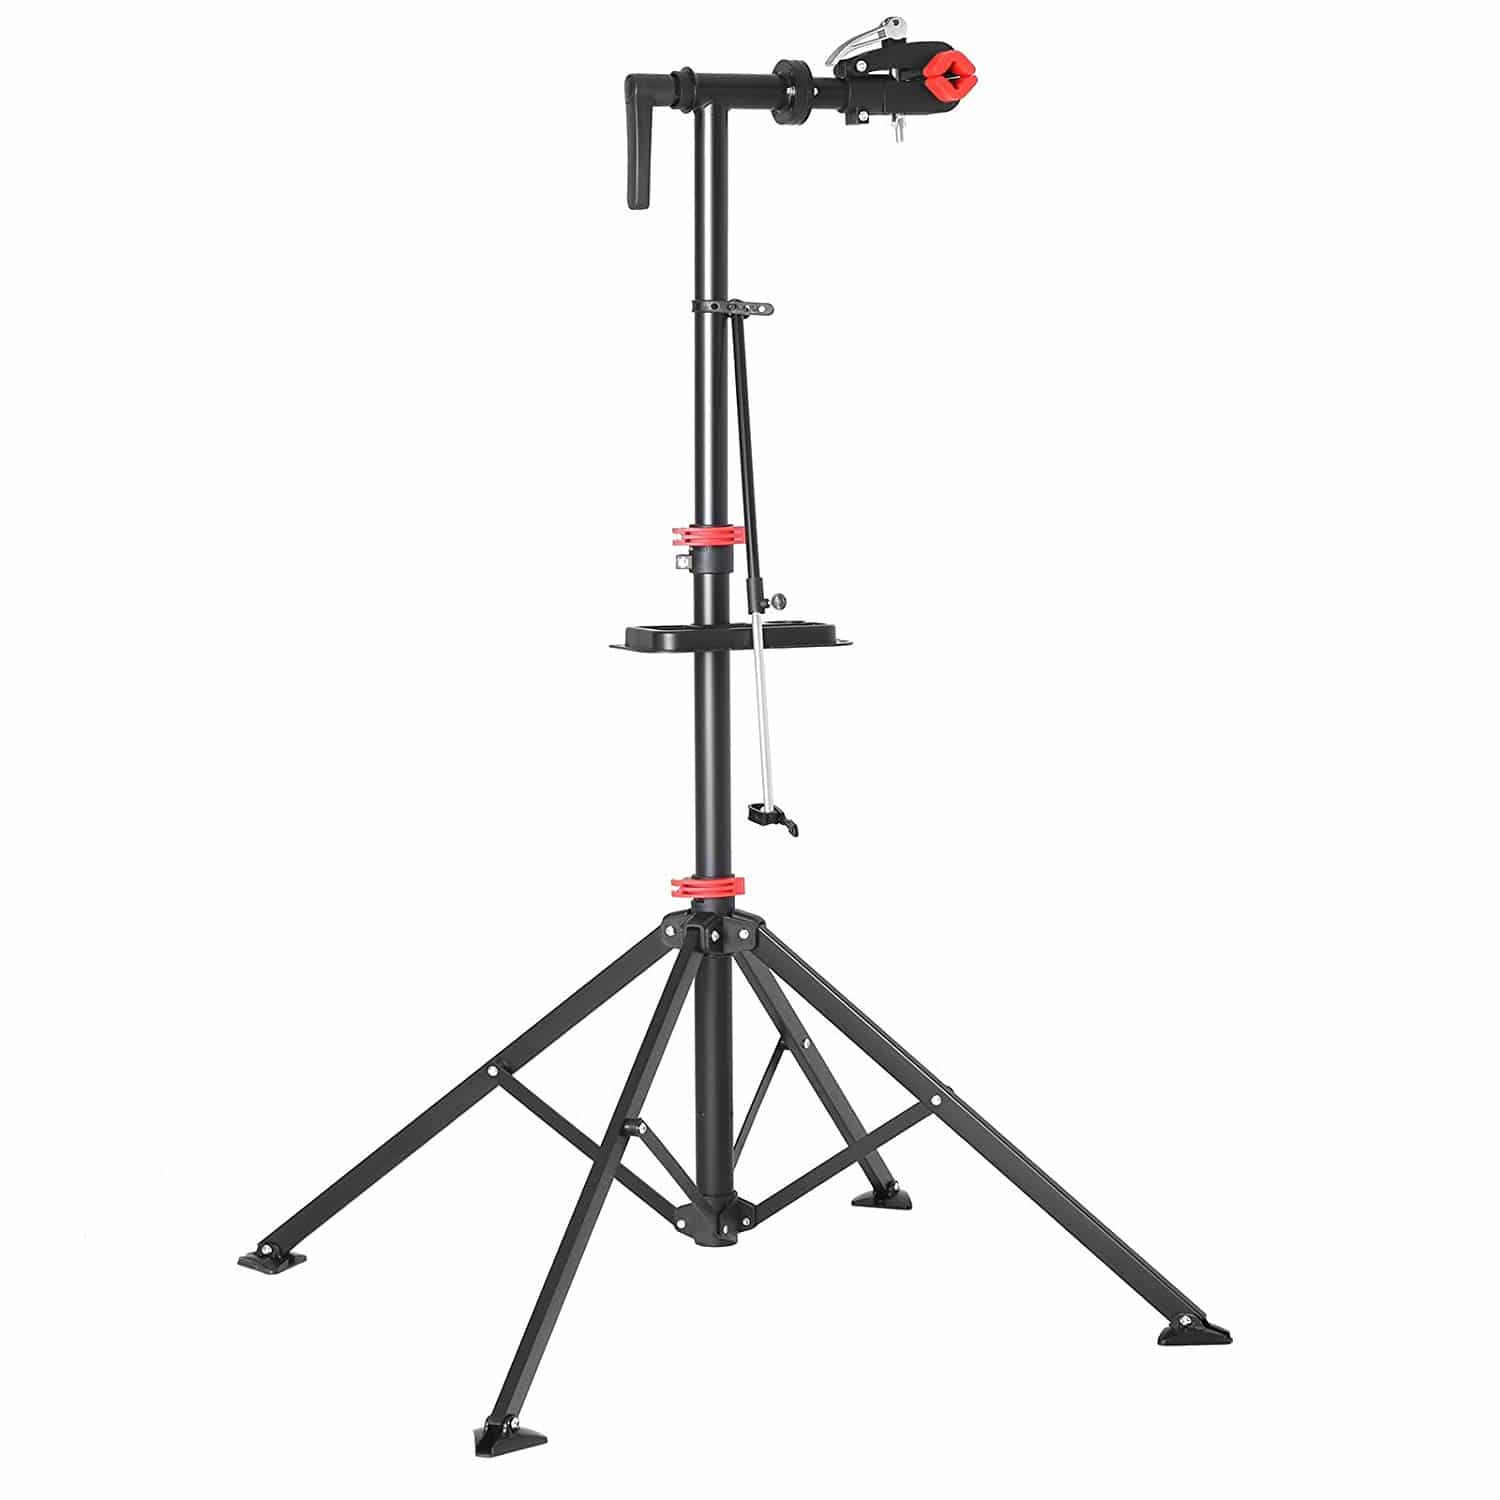 SONGMICS Quick Release Bike Repair Stand with Solid Welded Head USBR05B